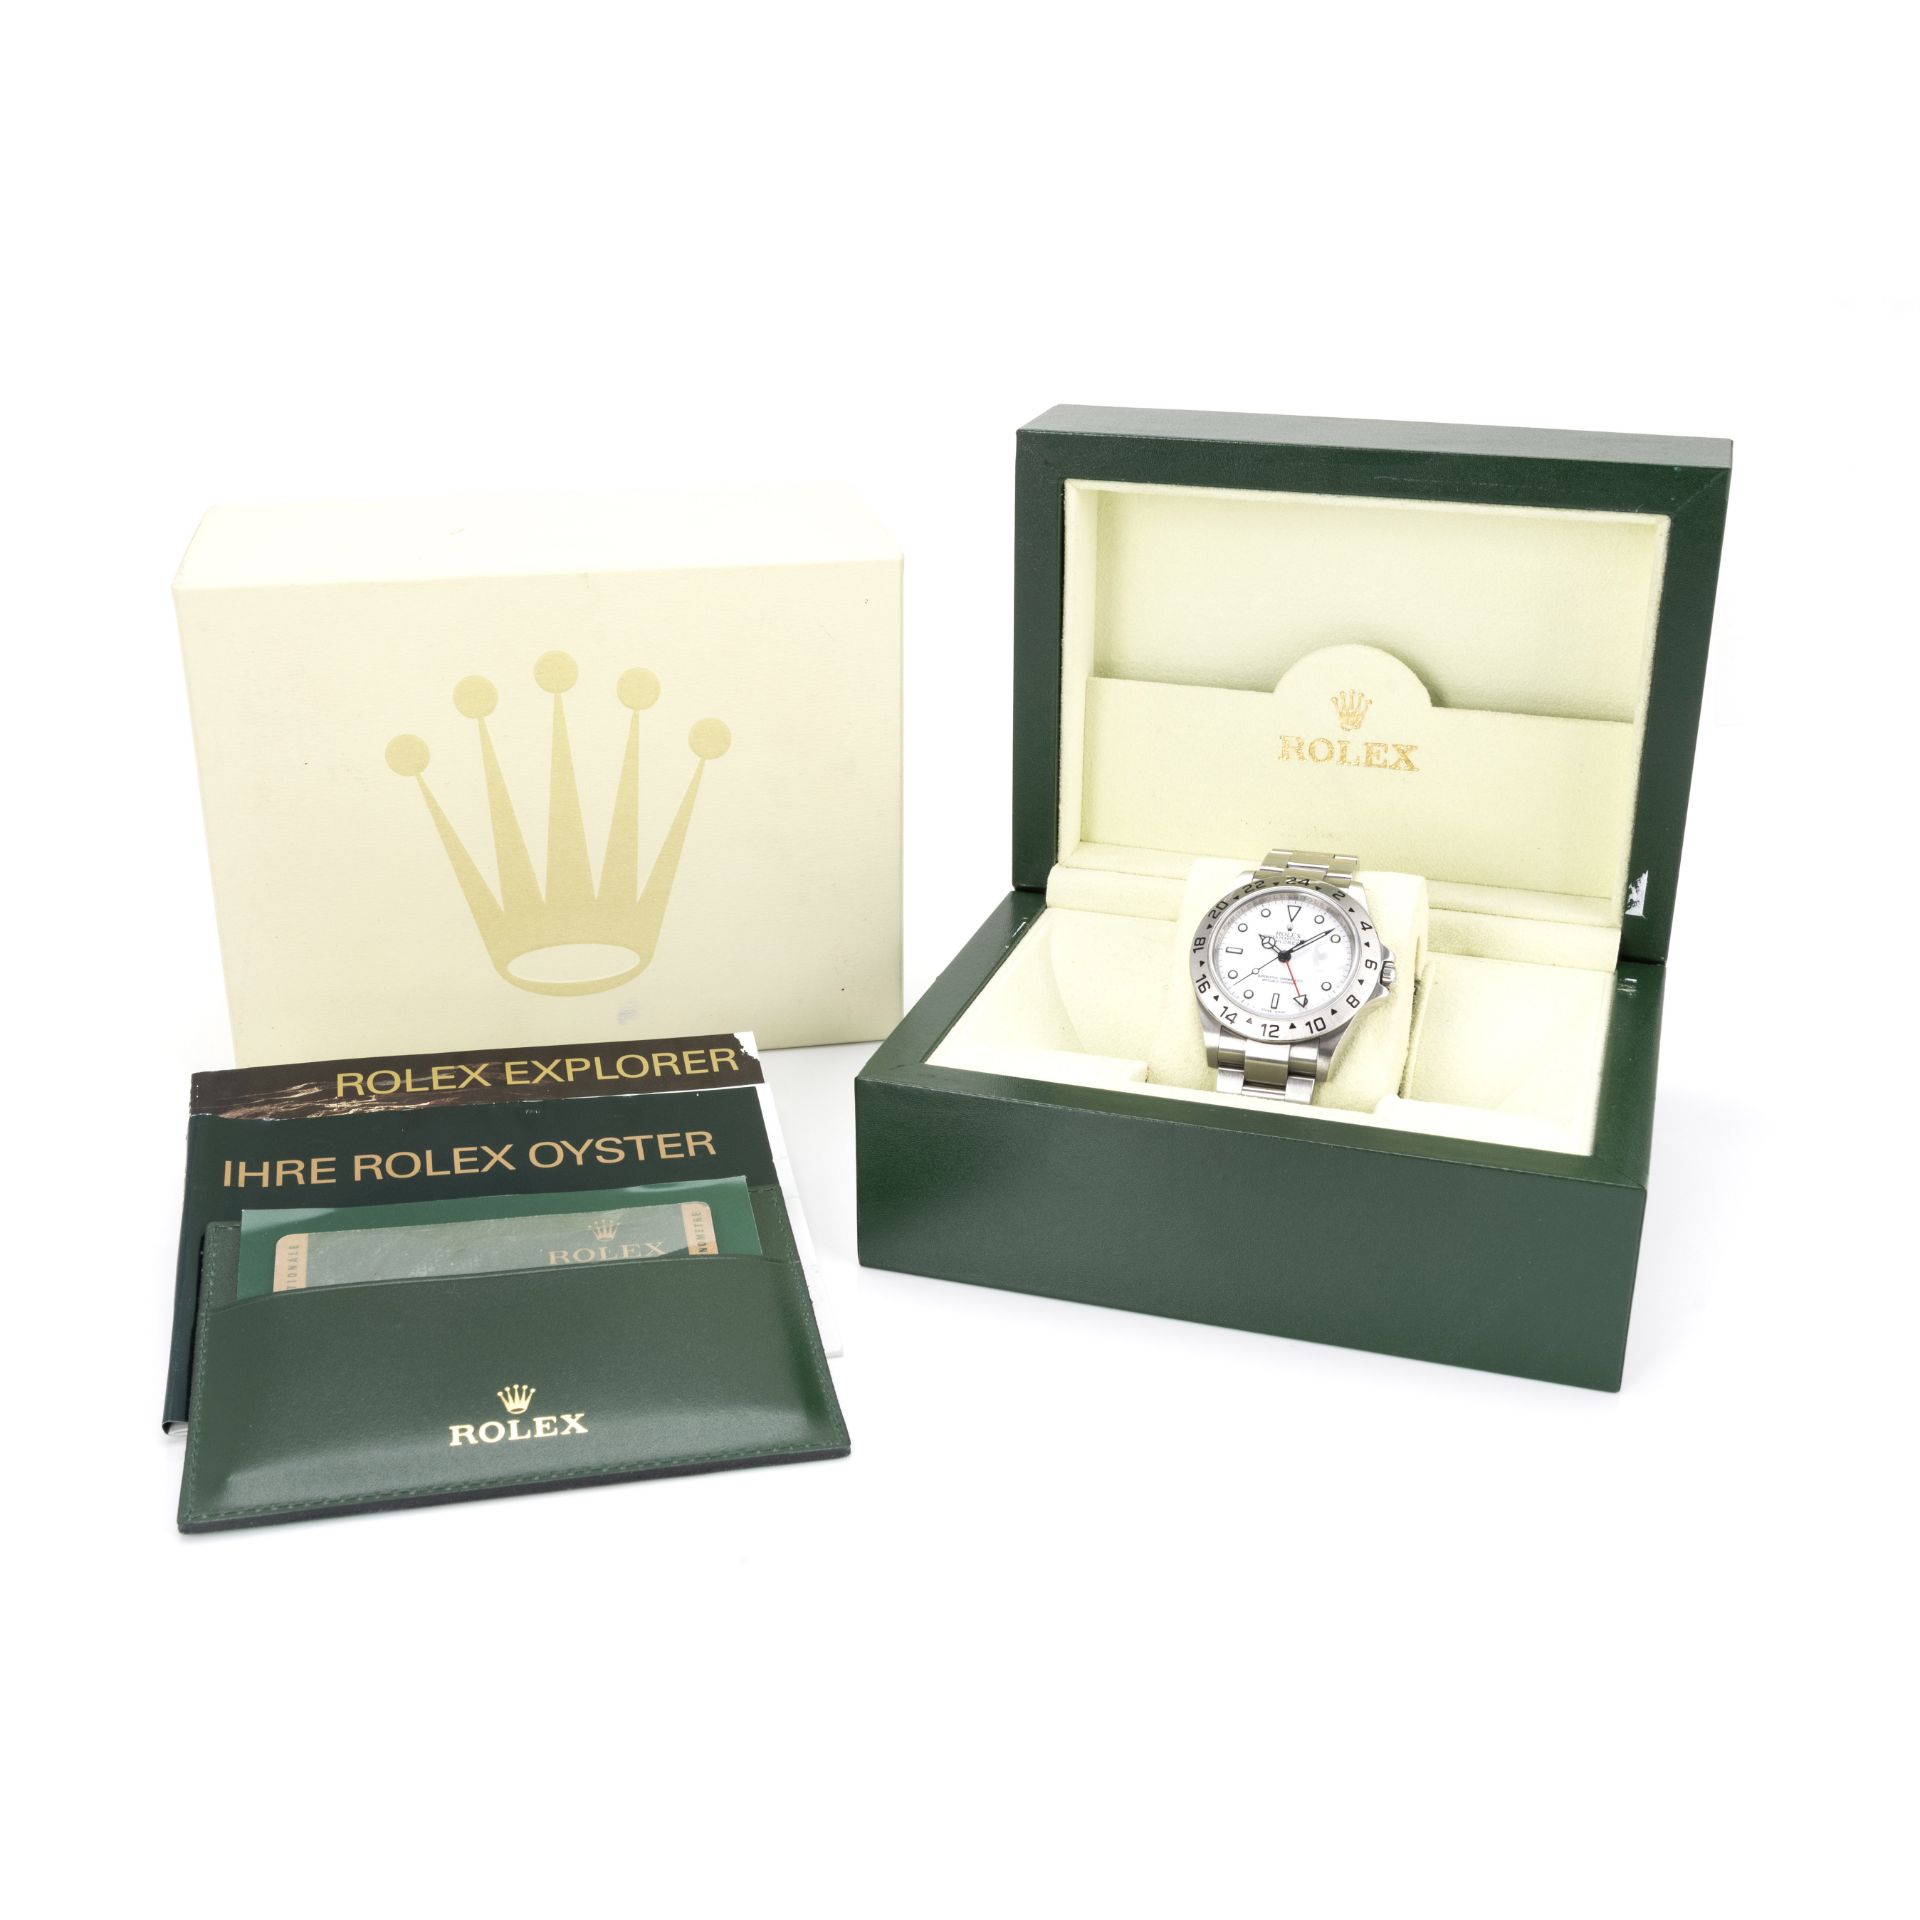 Rolex Oyster Perpetual Date Explorer - Image 6 of 6